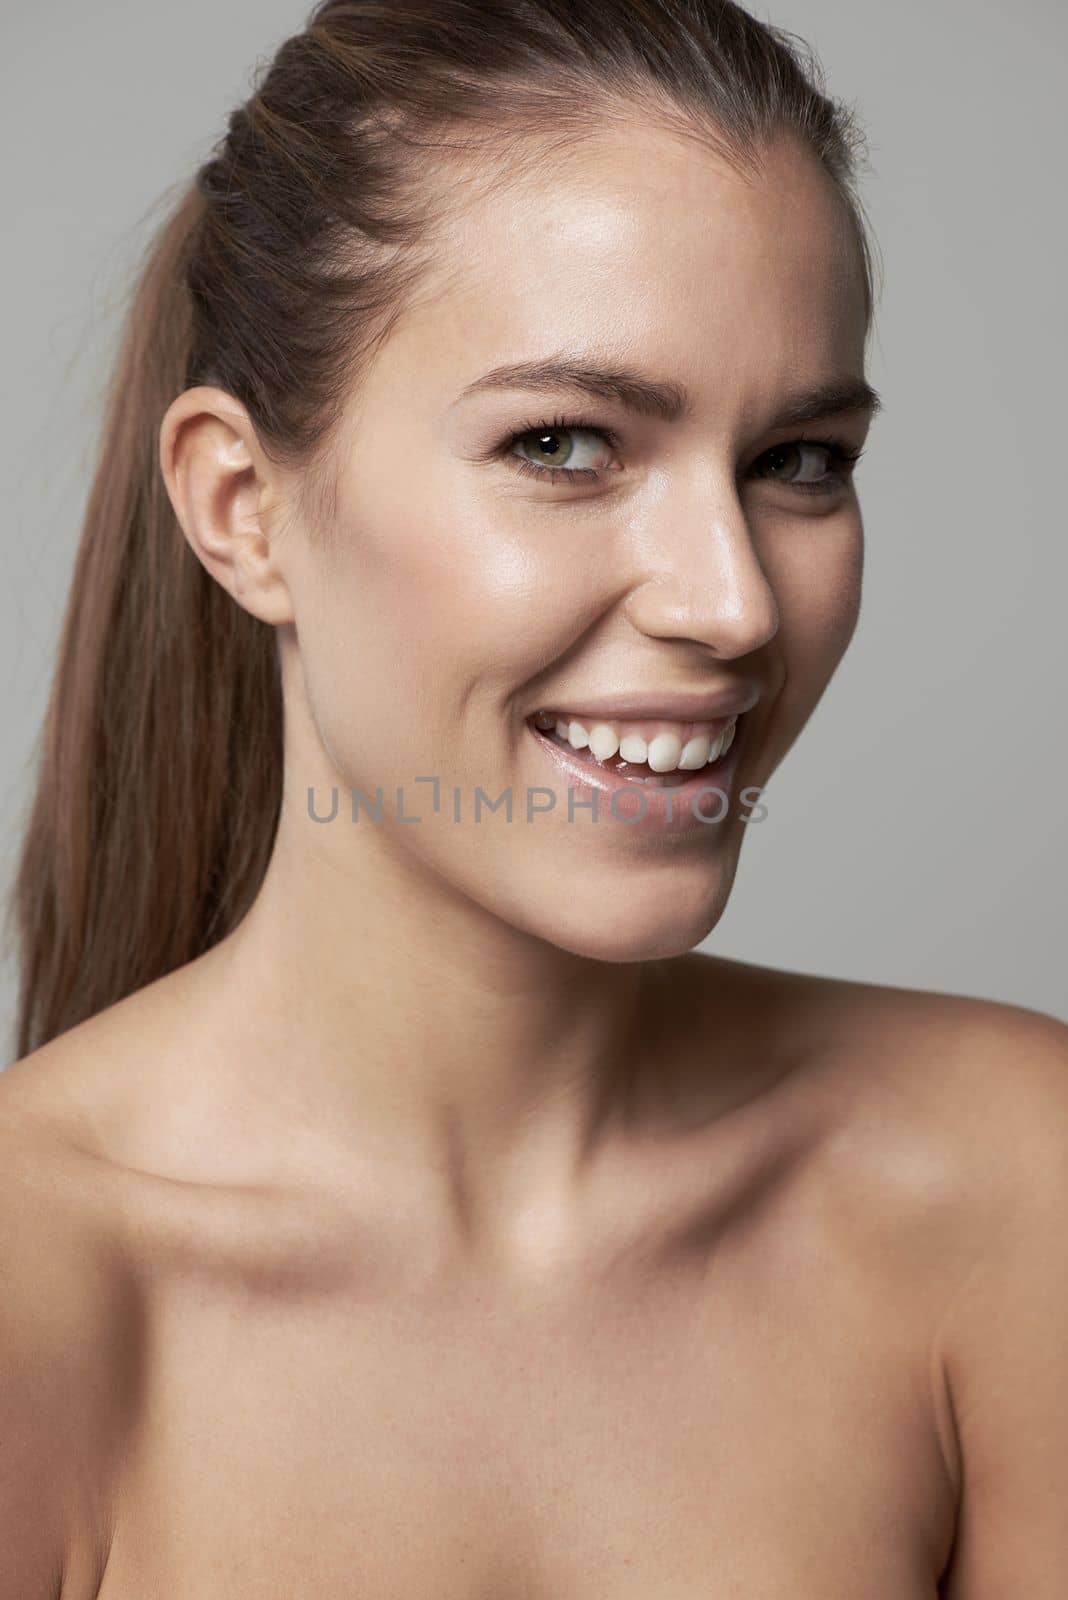 Beauty in simplicity. a beautiful young woman against a gray background